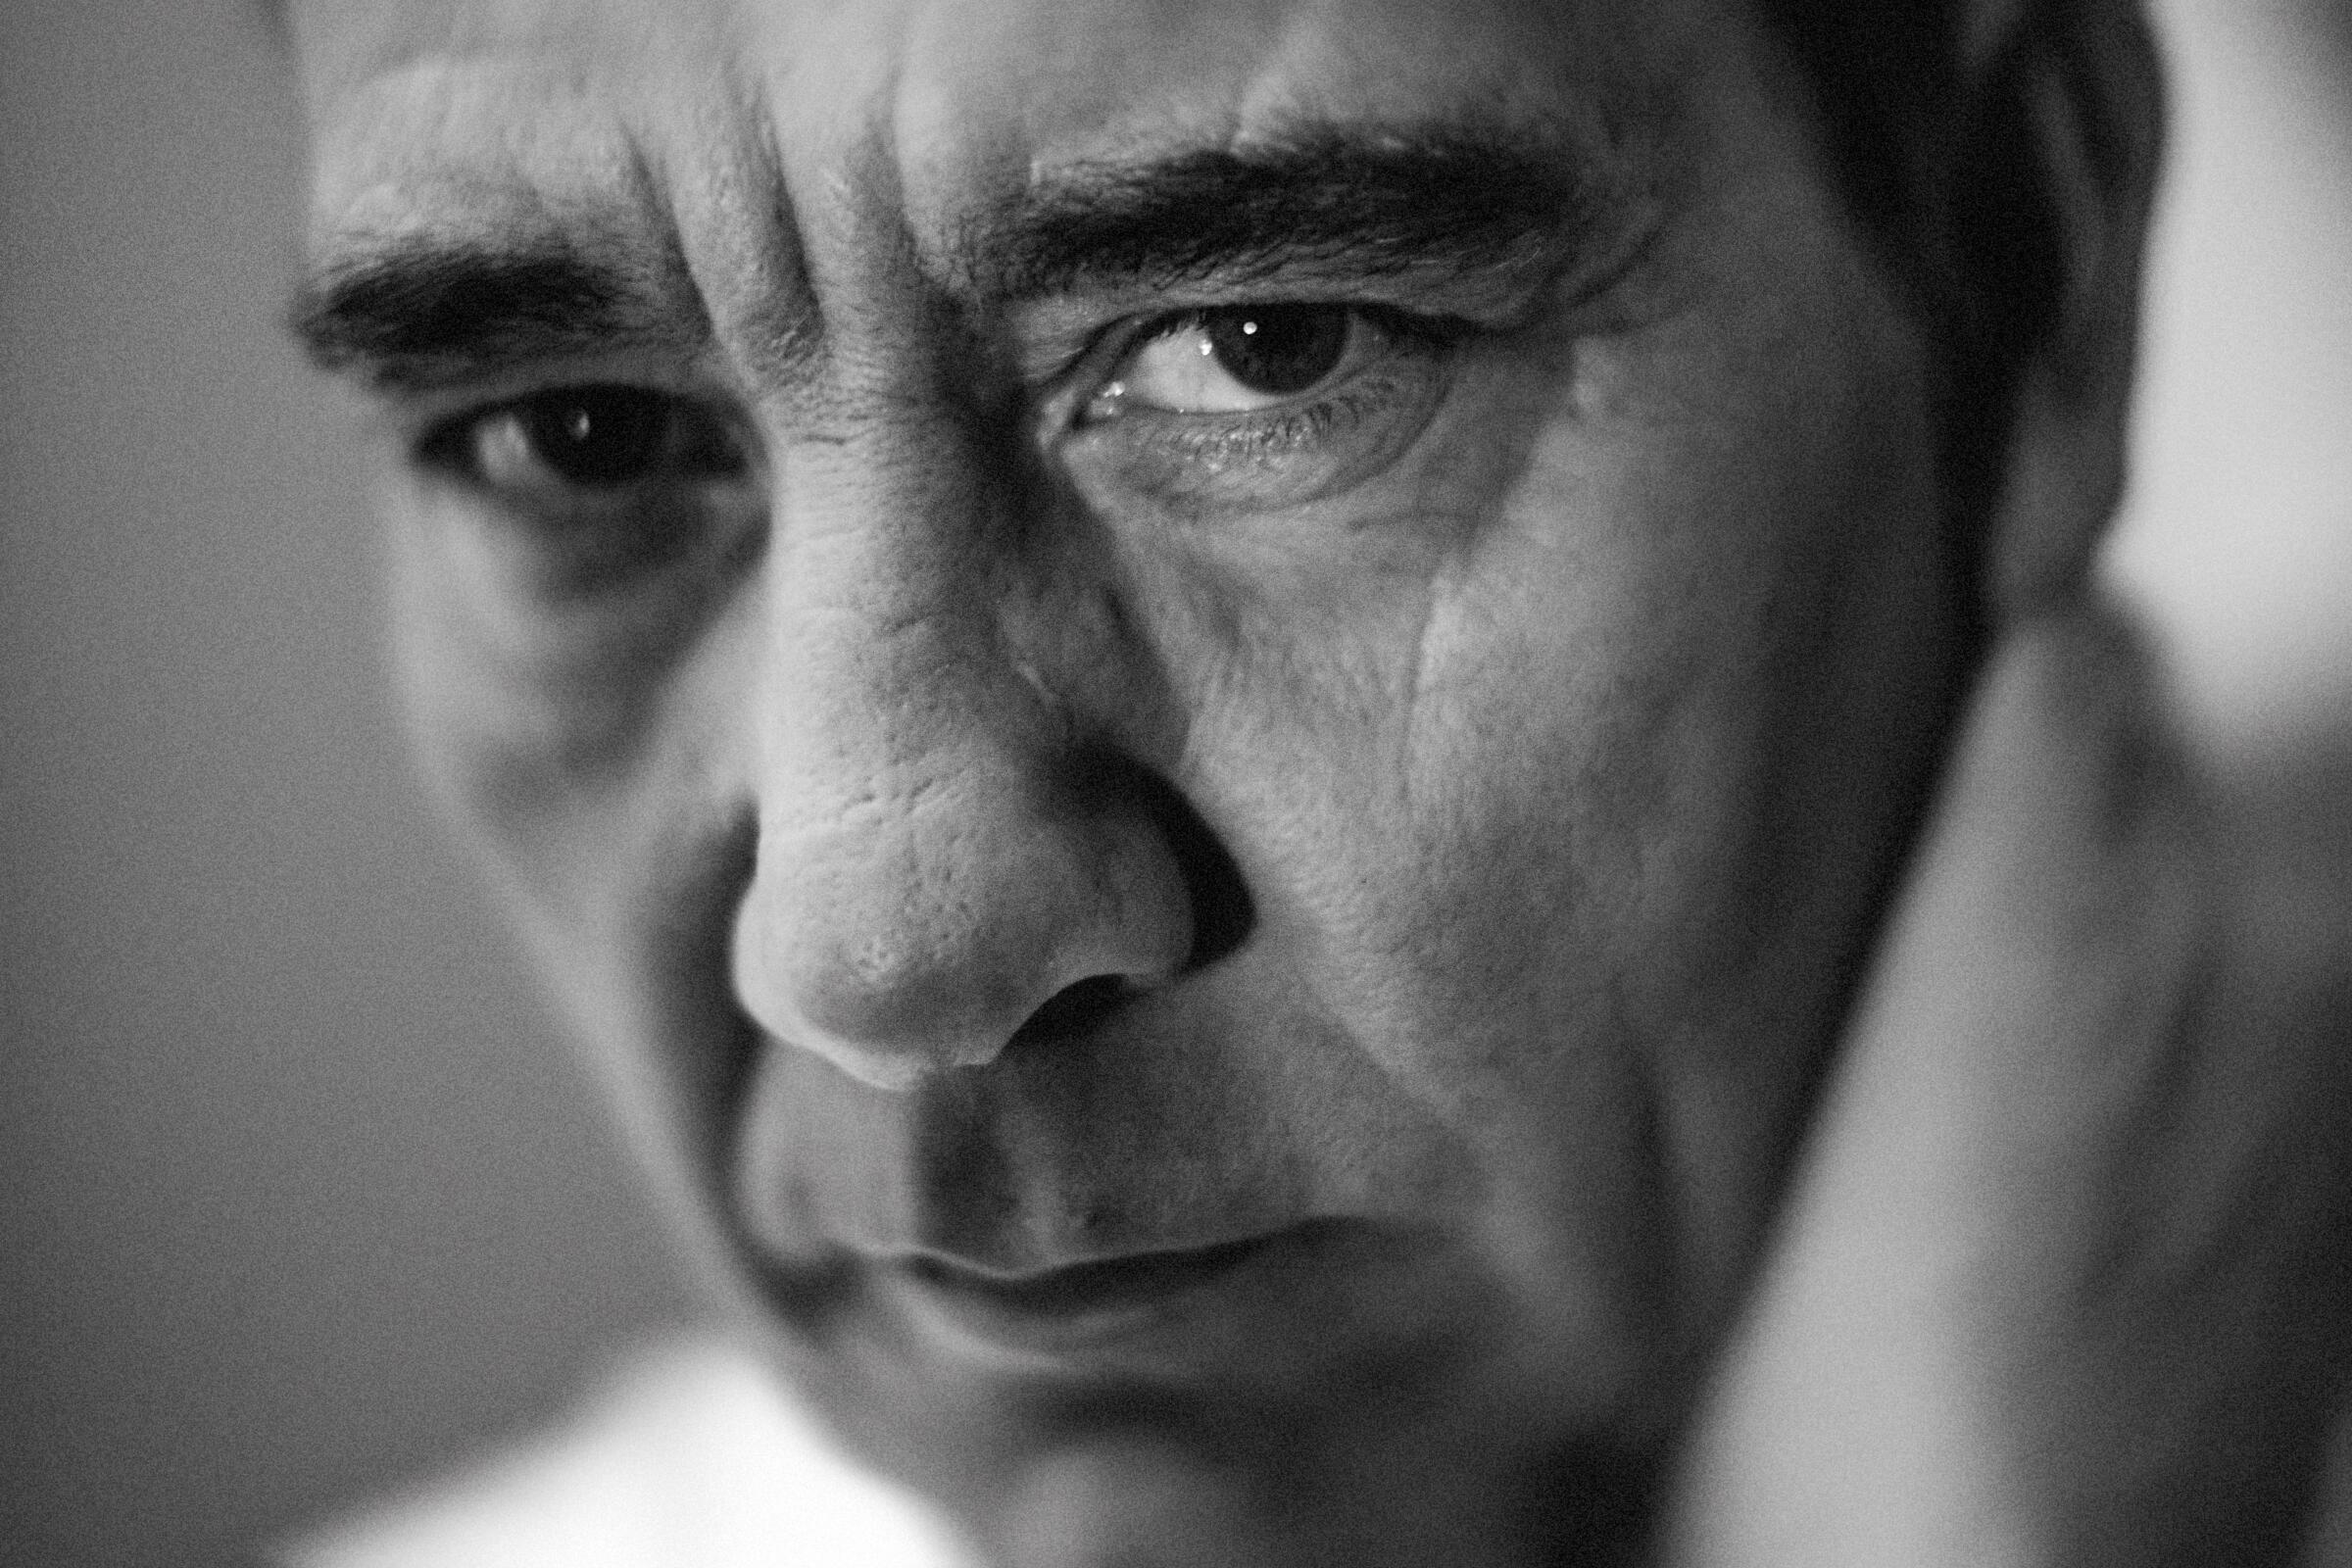 A closeup shot of Clive Owen, who is looking at the camera.